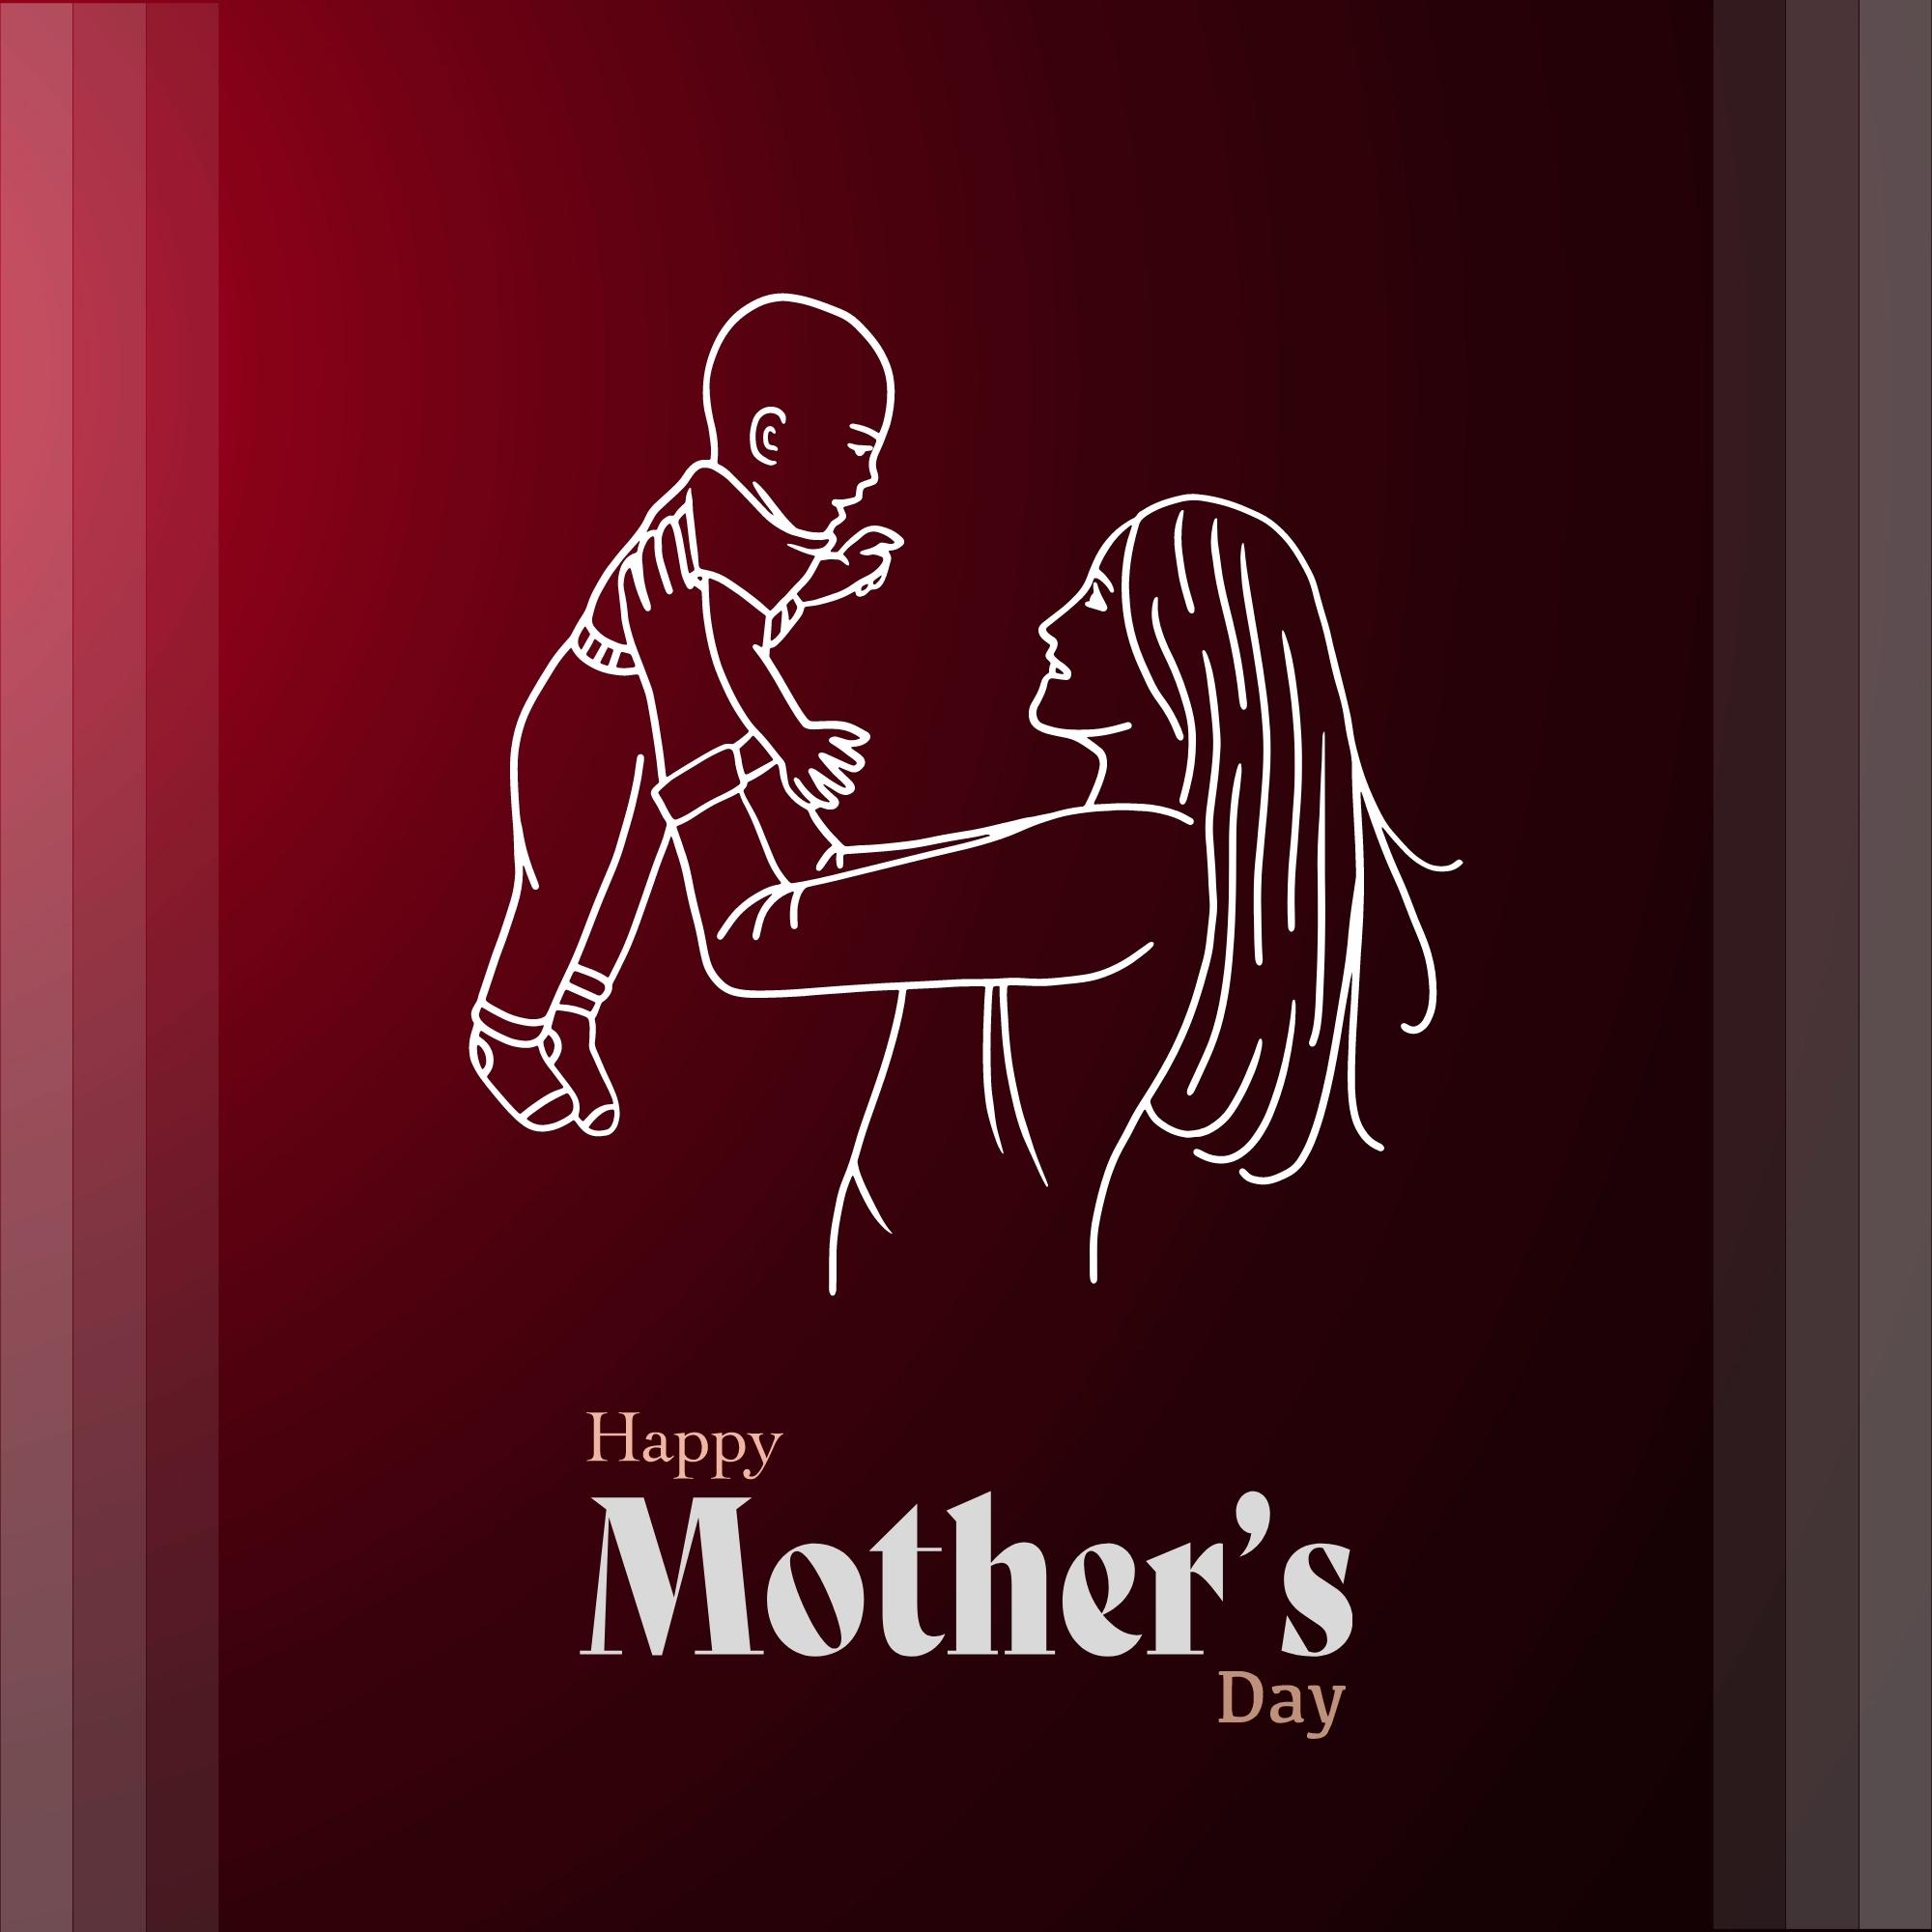 Happy Mothers Day Images 984 Free Download 8k4kHd full HD free download.